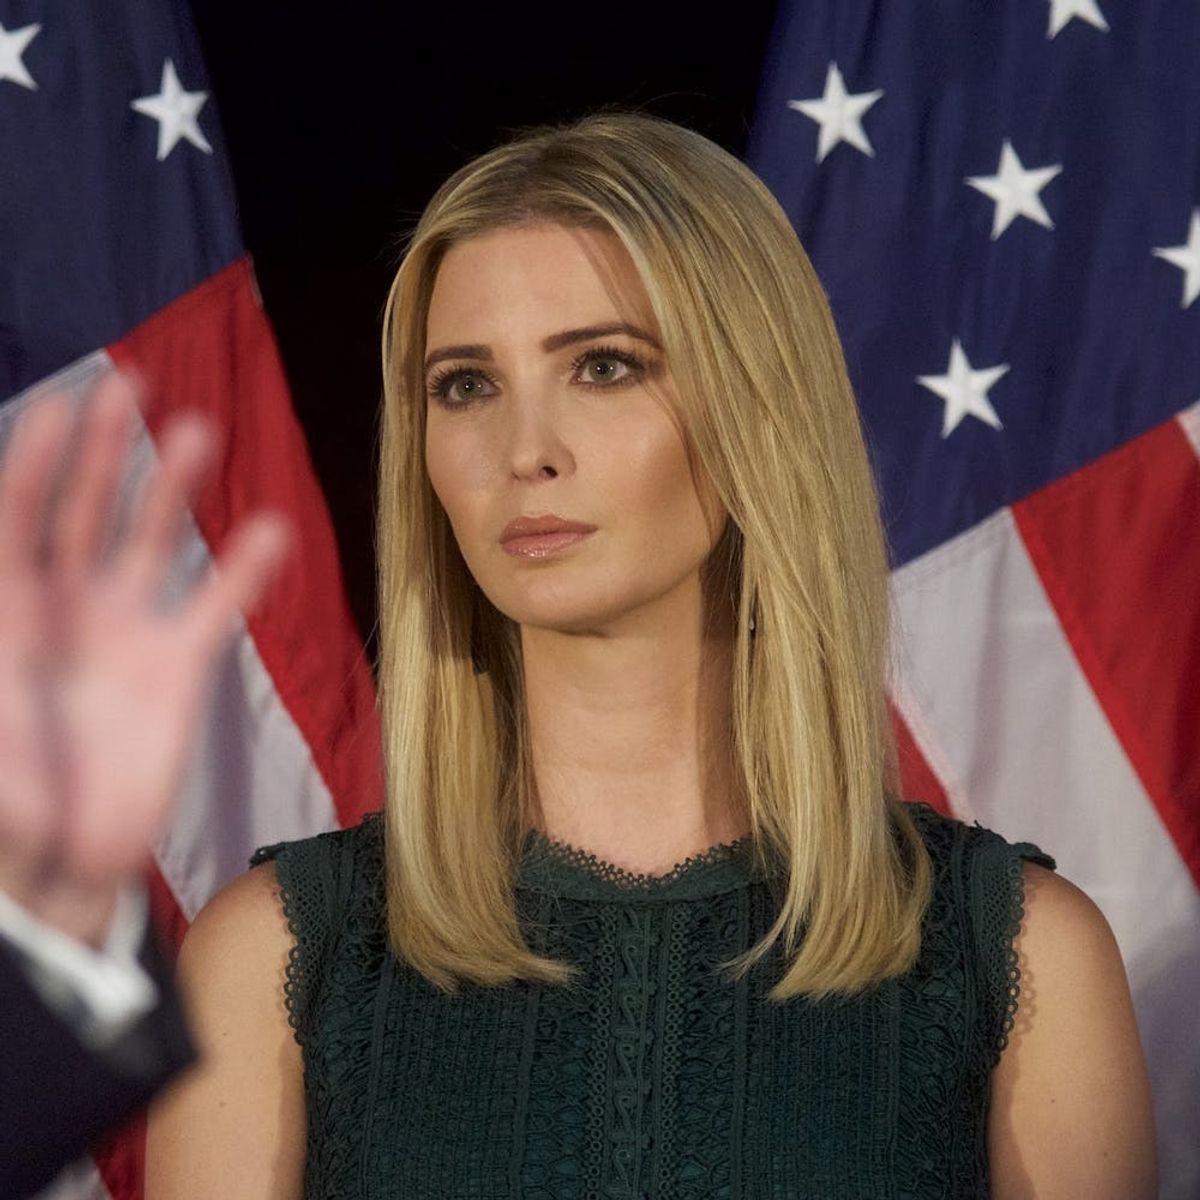 This Is What Ivanka Trump’s Brand Has to Say About Those Department Store Rumors